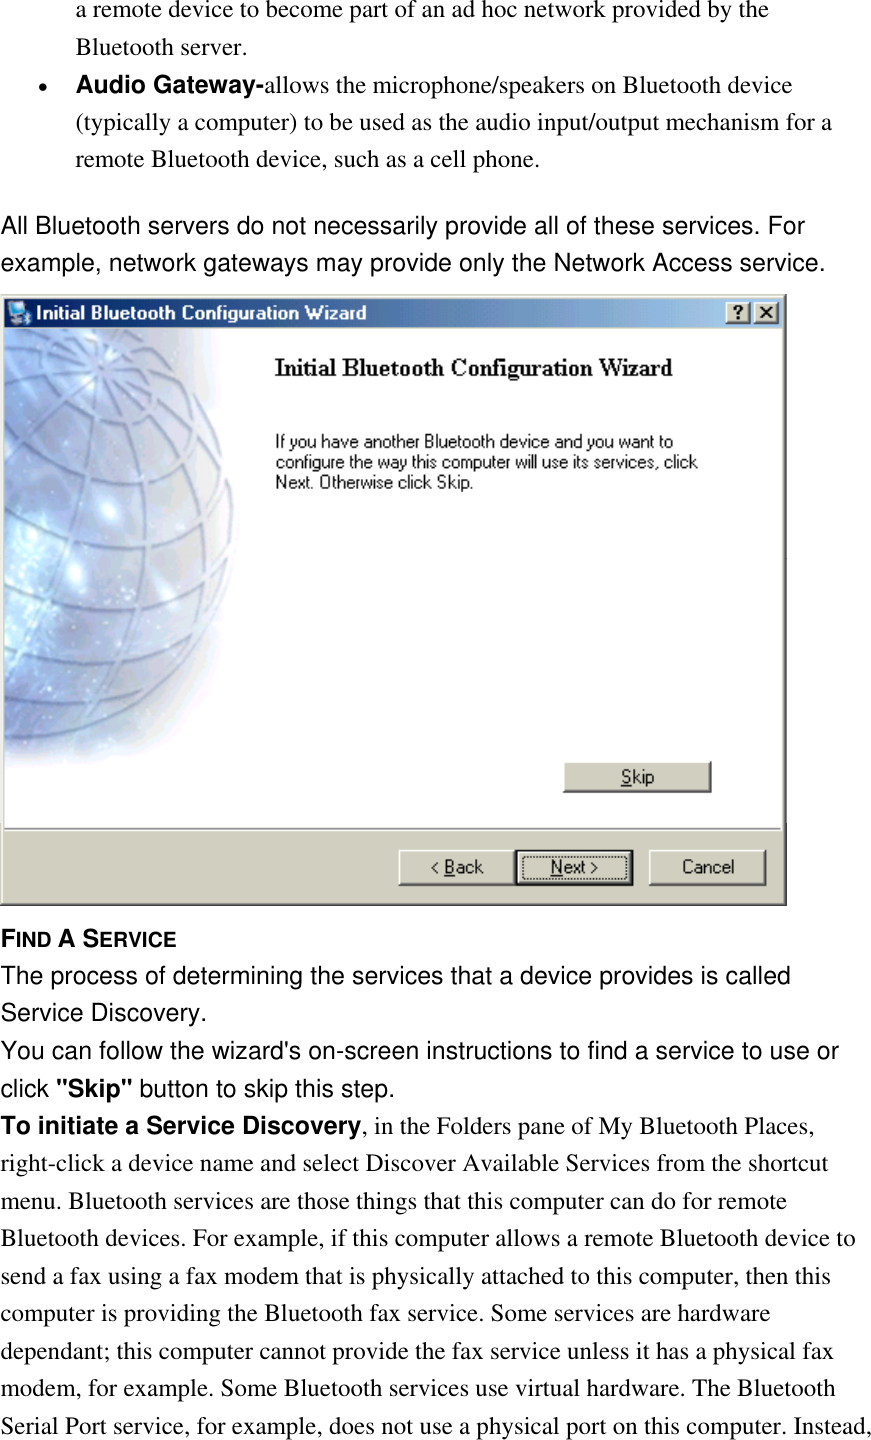 a remote device to become part of an ad hoc network provided by the Bluetooth server. •  Audio Gateway-allows the microphone/speakers on Bluetooth device (typically a computer) to be used as the audio input/output mechanism for a remote Bluetooth device, such as a cell phone. All Bluetooth servers do not necessarily provide all of these services. For example, network gateways may provide only the Network Access service.  FIND A SERVICE The process of determining the services that a device provides is called Service Discovery. You can follow the wizard&apos;s on-screen instructions to find a service to use or click &quot;Skip&quot; button to skip this step. To initiate a Service Discovery, in the Folders pane of My Bluetooth Places, right-click a device name and select Discover Available Services from the shortcut menu. Bluetooth services are those things that this computer can do for remote Bluetooth devices. For example, if this computer allows a remote Bluetooth device to send a fax using a fax modem that is physically attached to this computer, then this computer is providing the Bluetooth fax service. Some services are hardware dependant; this computer cannot provide the fax service unless it has a physical fax modem, for example. Some Bluetooth services use virtual hardware. The Bluetooth Serial Port service, for example, does not use a physical port on this computer. Instead, 